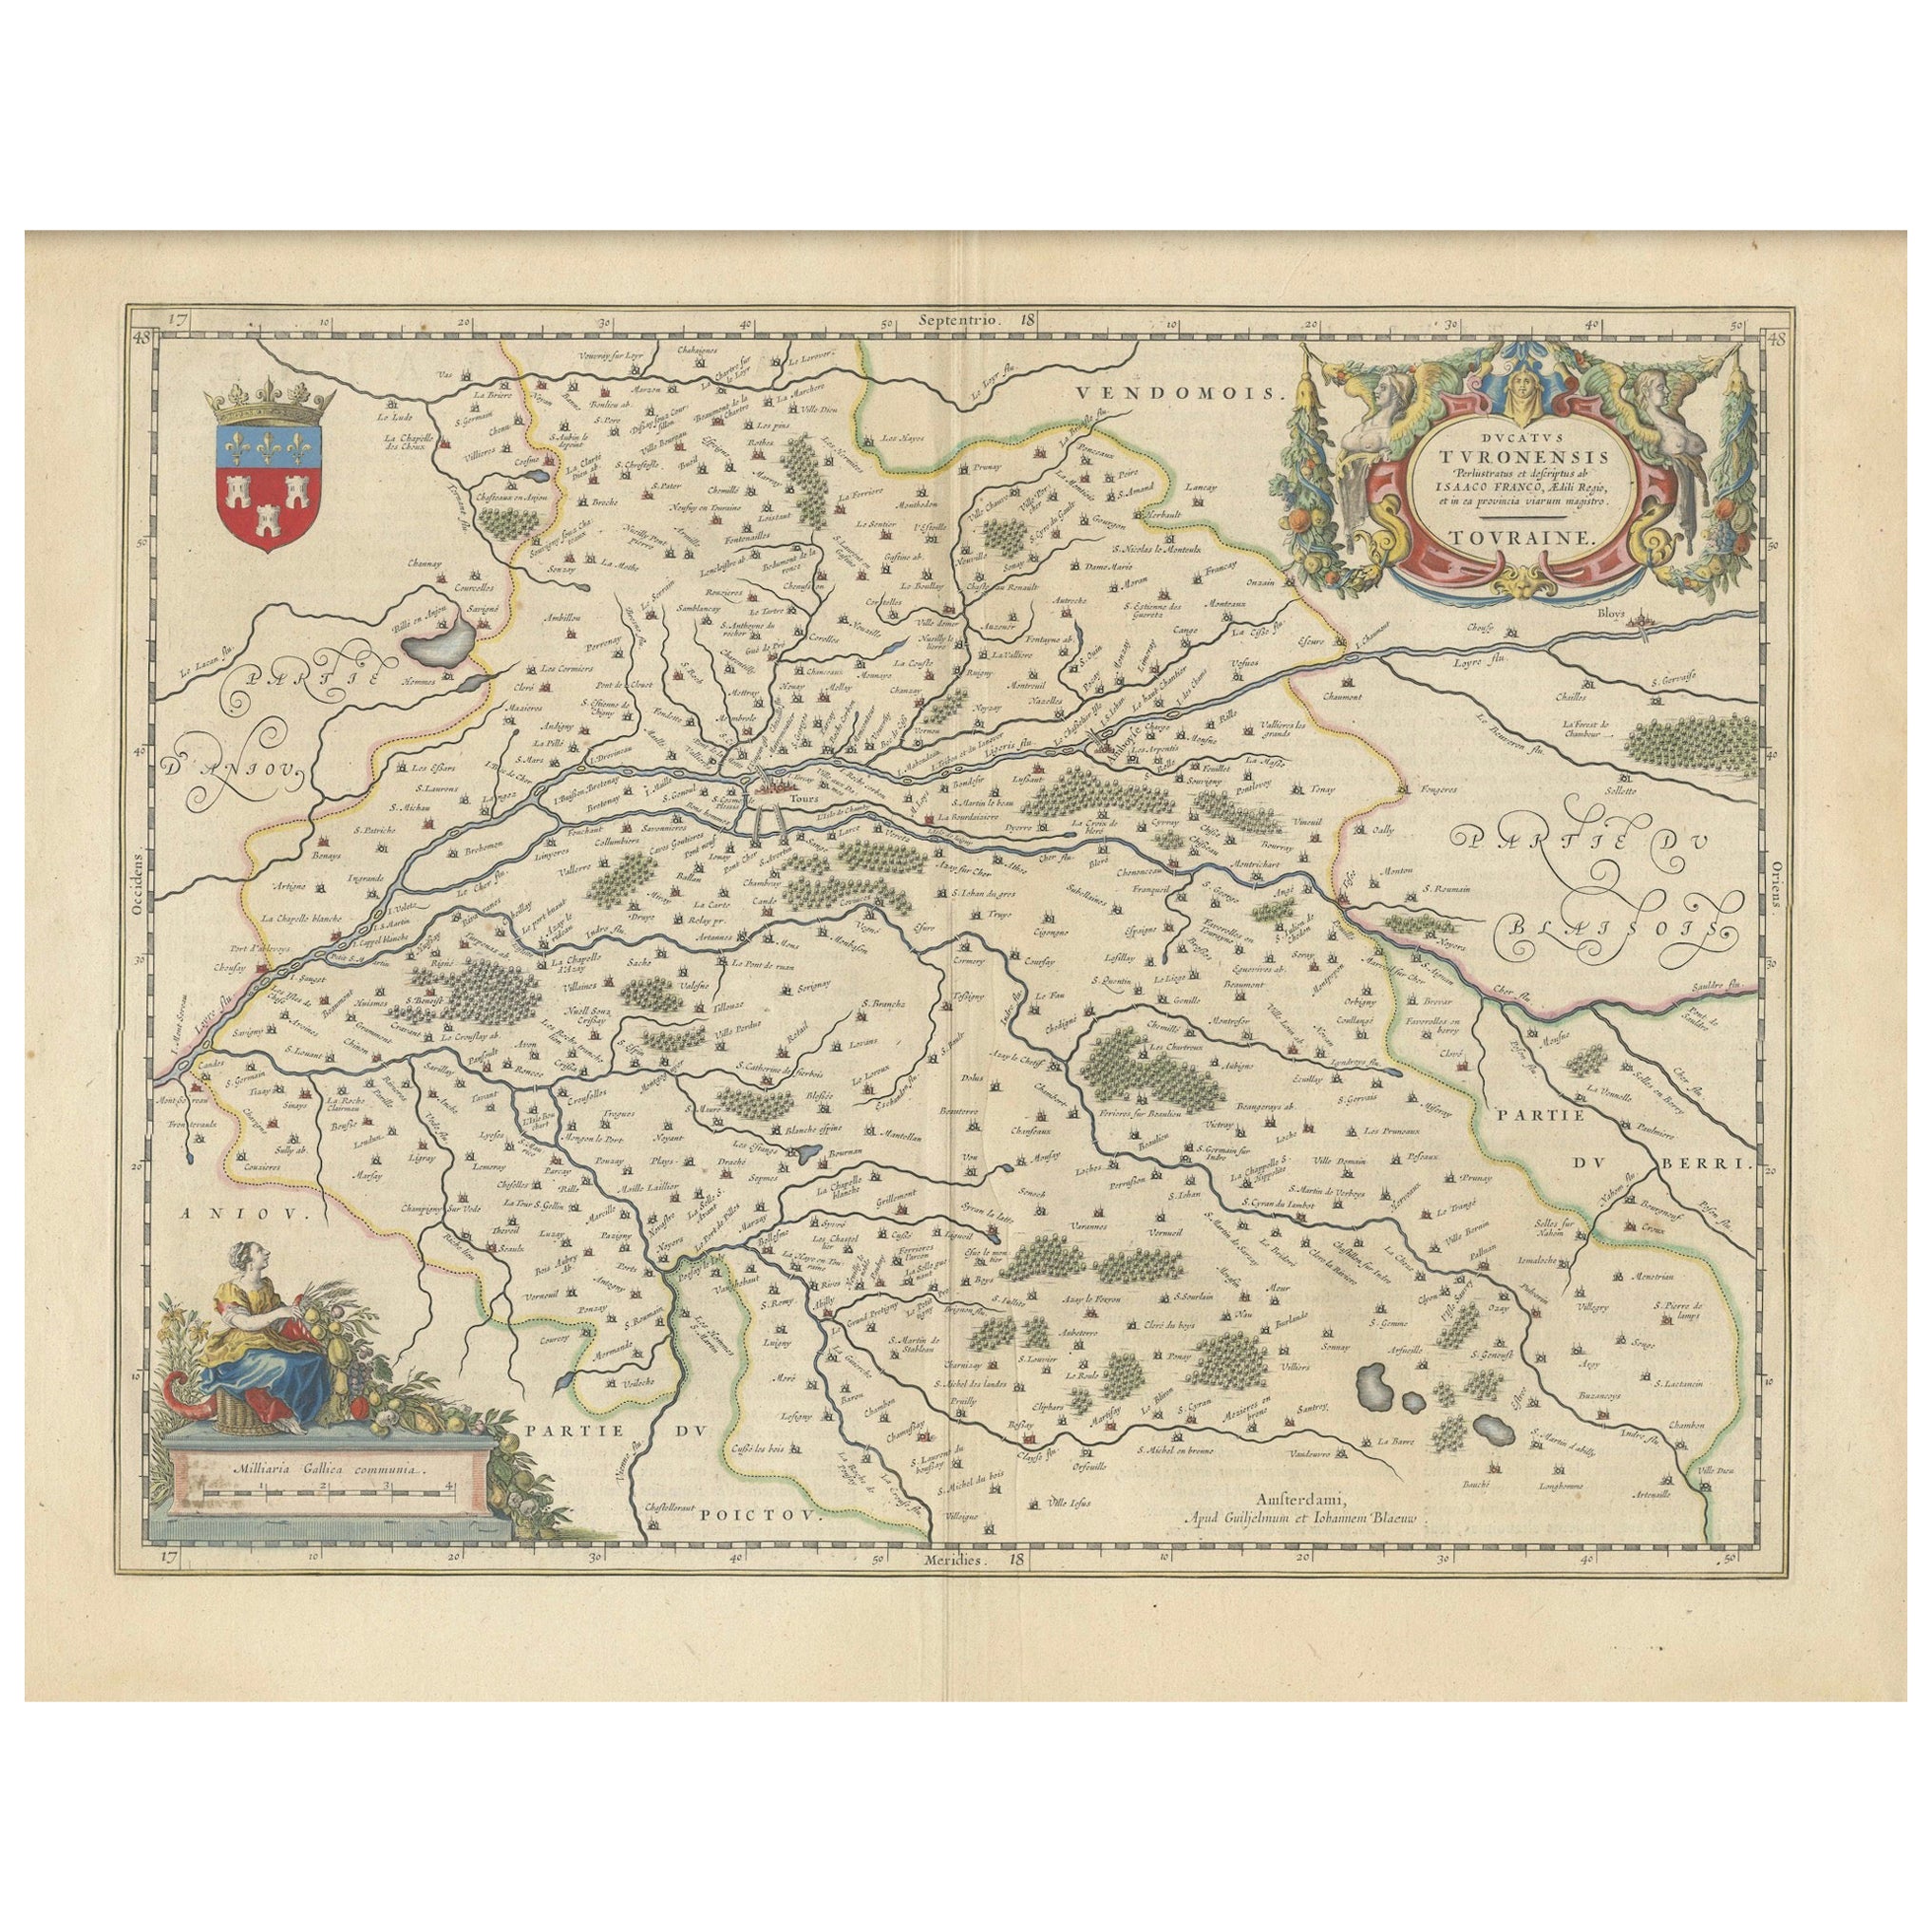 Cartographic Elegance of Touraine: A 17th-Century Map Showing French Heritage For Sale